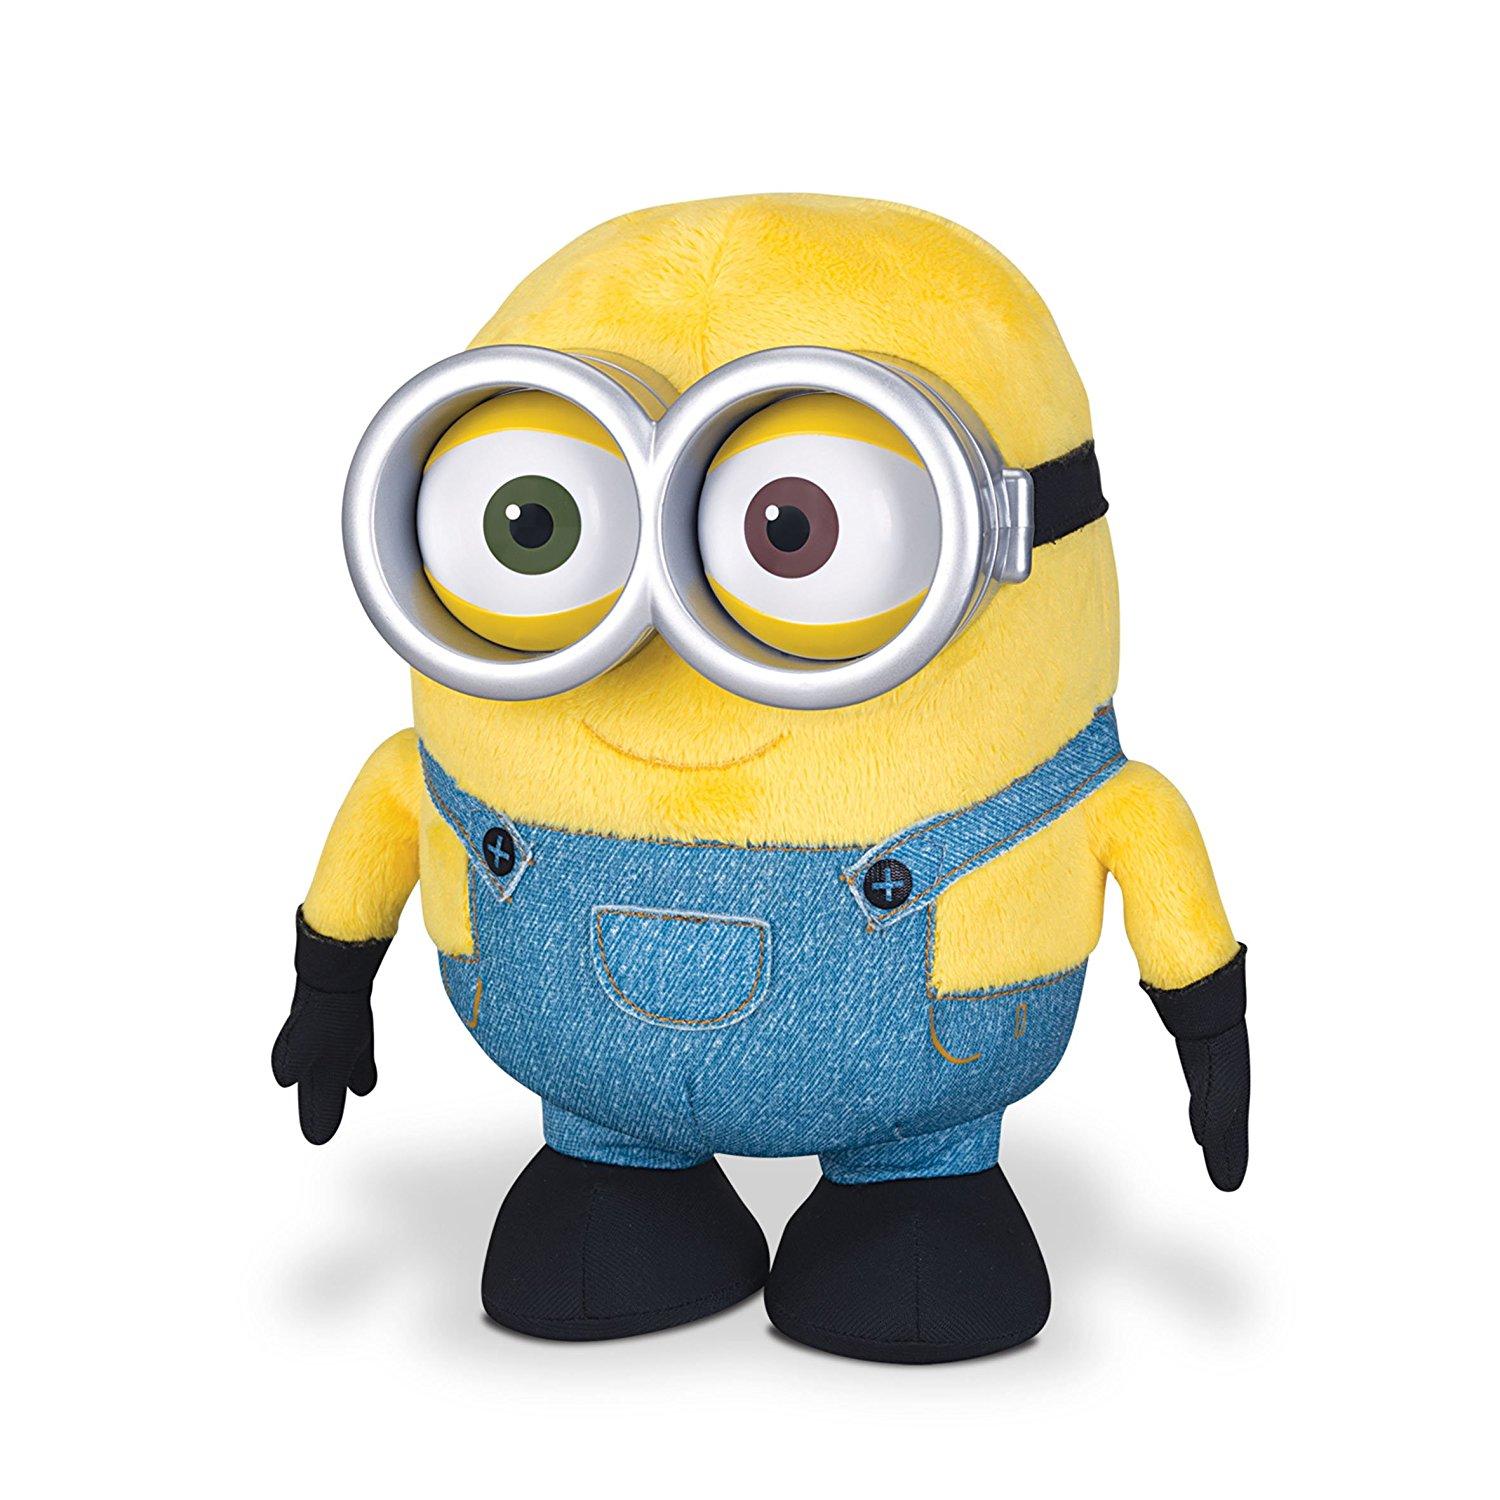 image for PC: Minions Wallpaper and Image